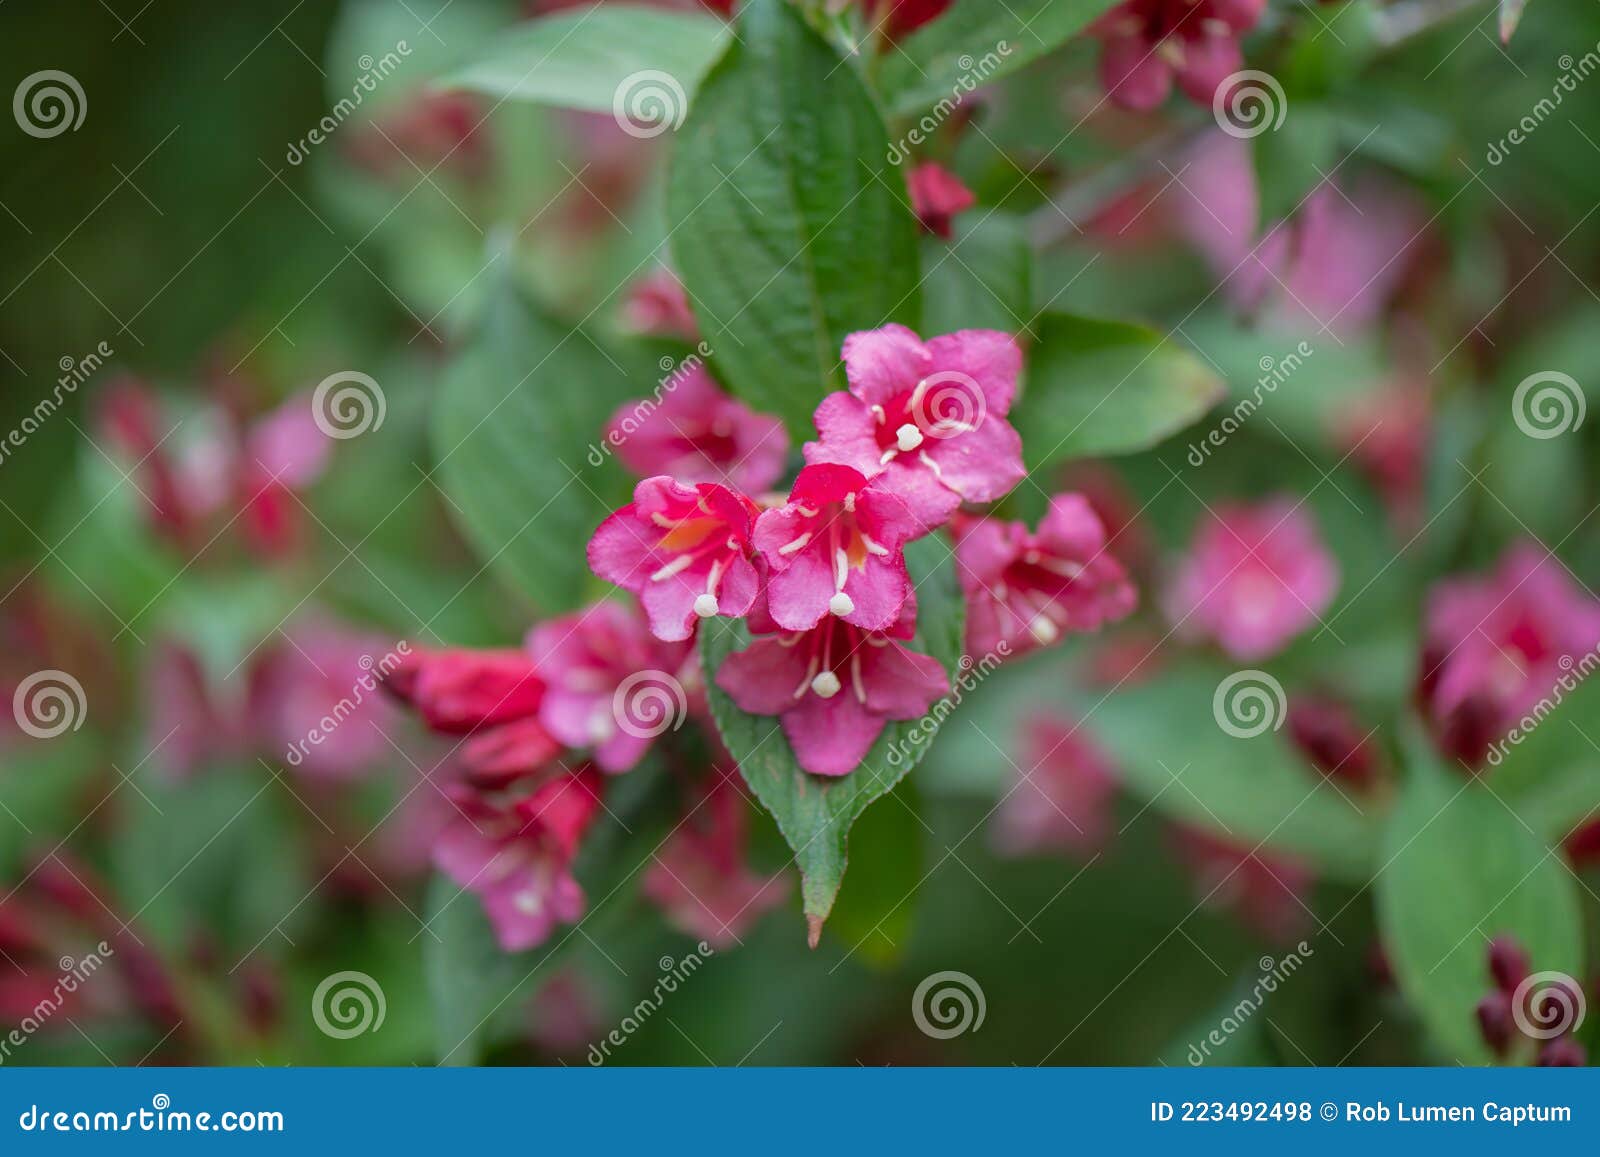 japanese weigela japonica, rosey-red, tubular inflorescence and leaves